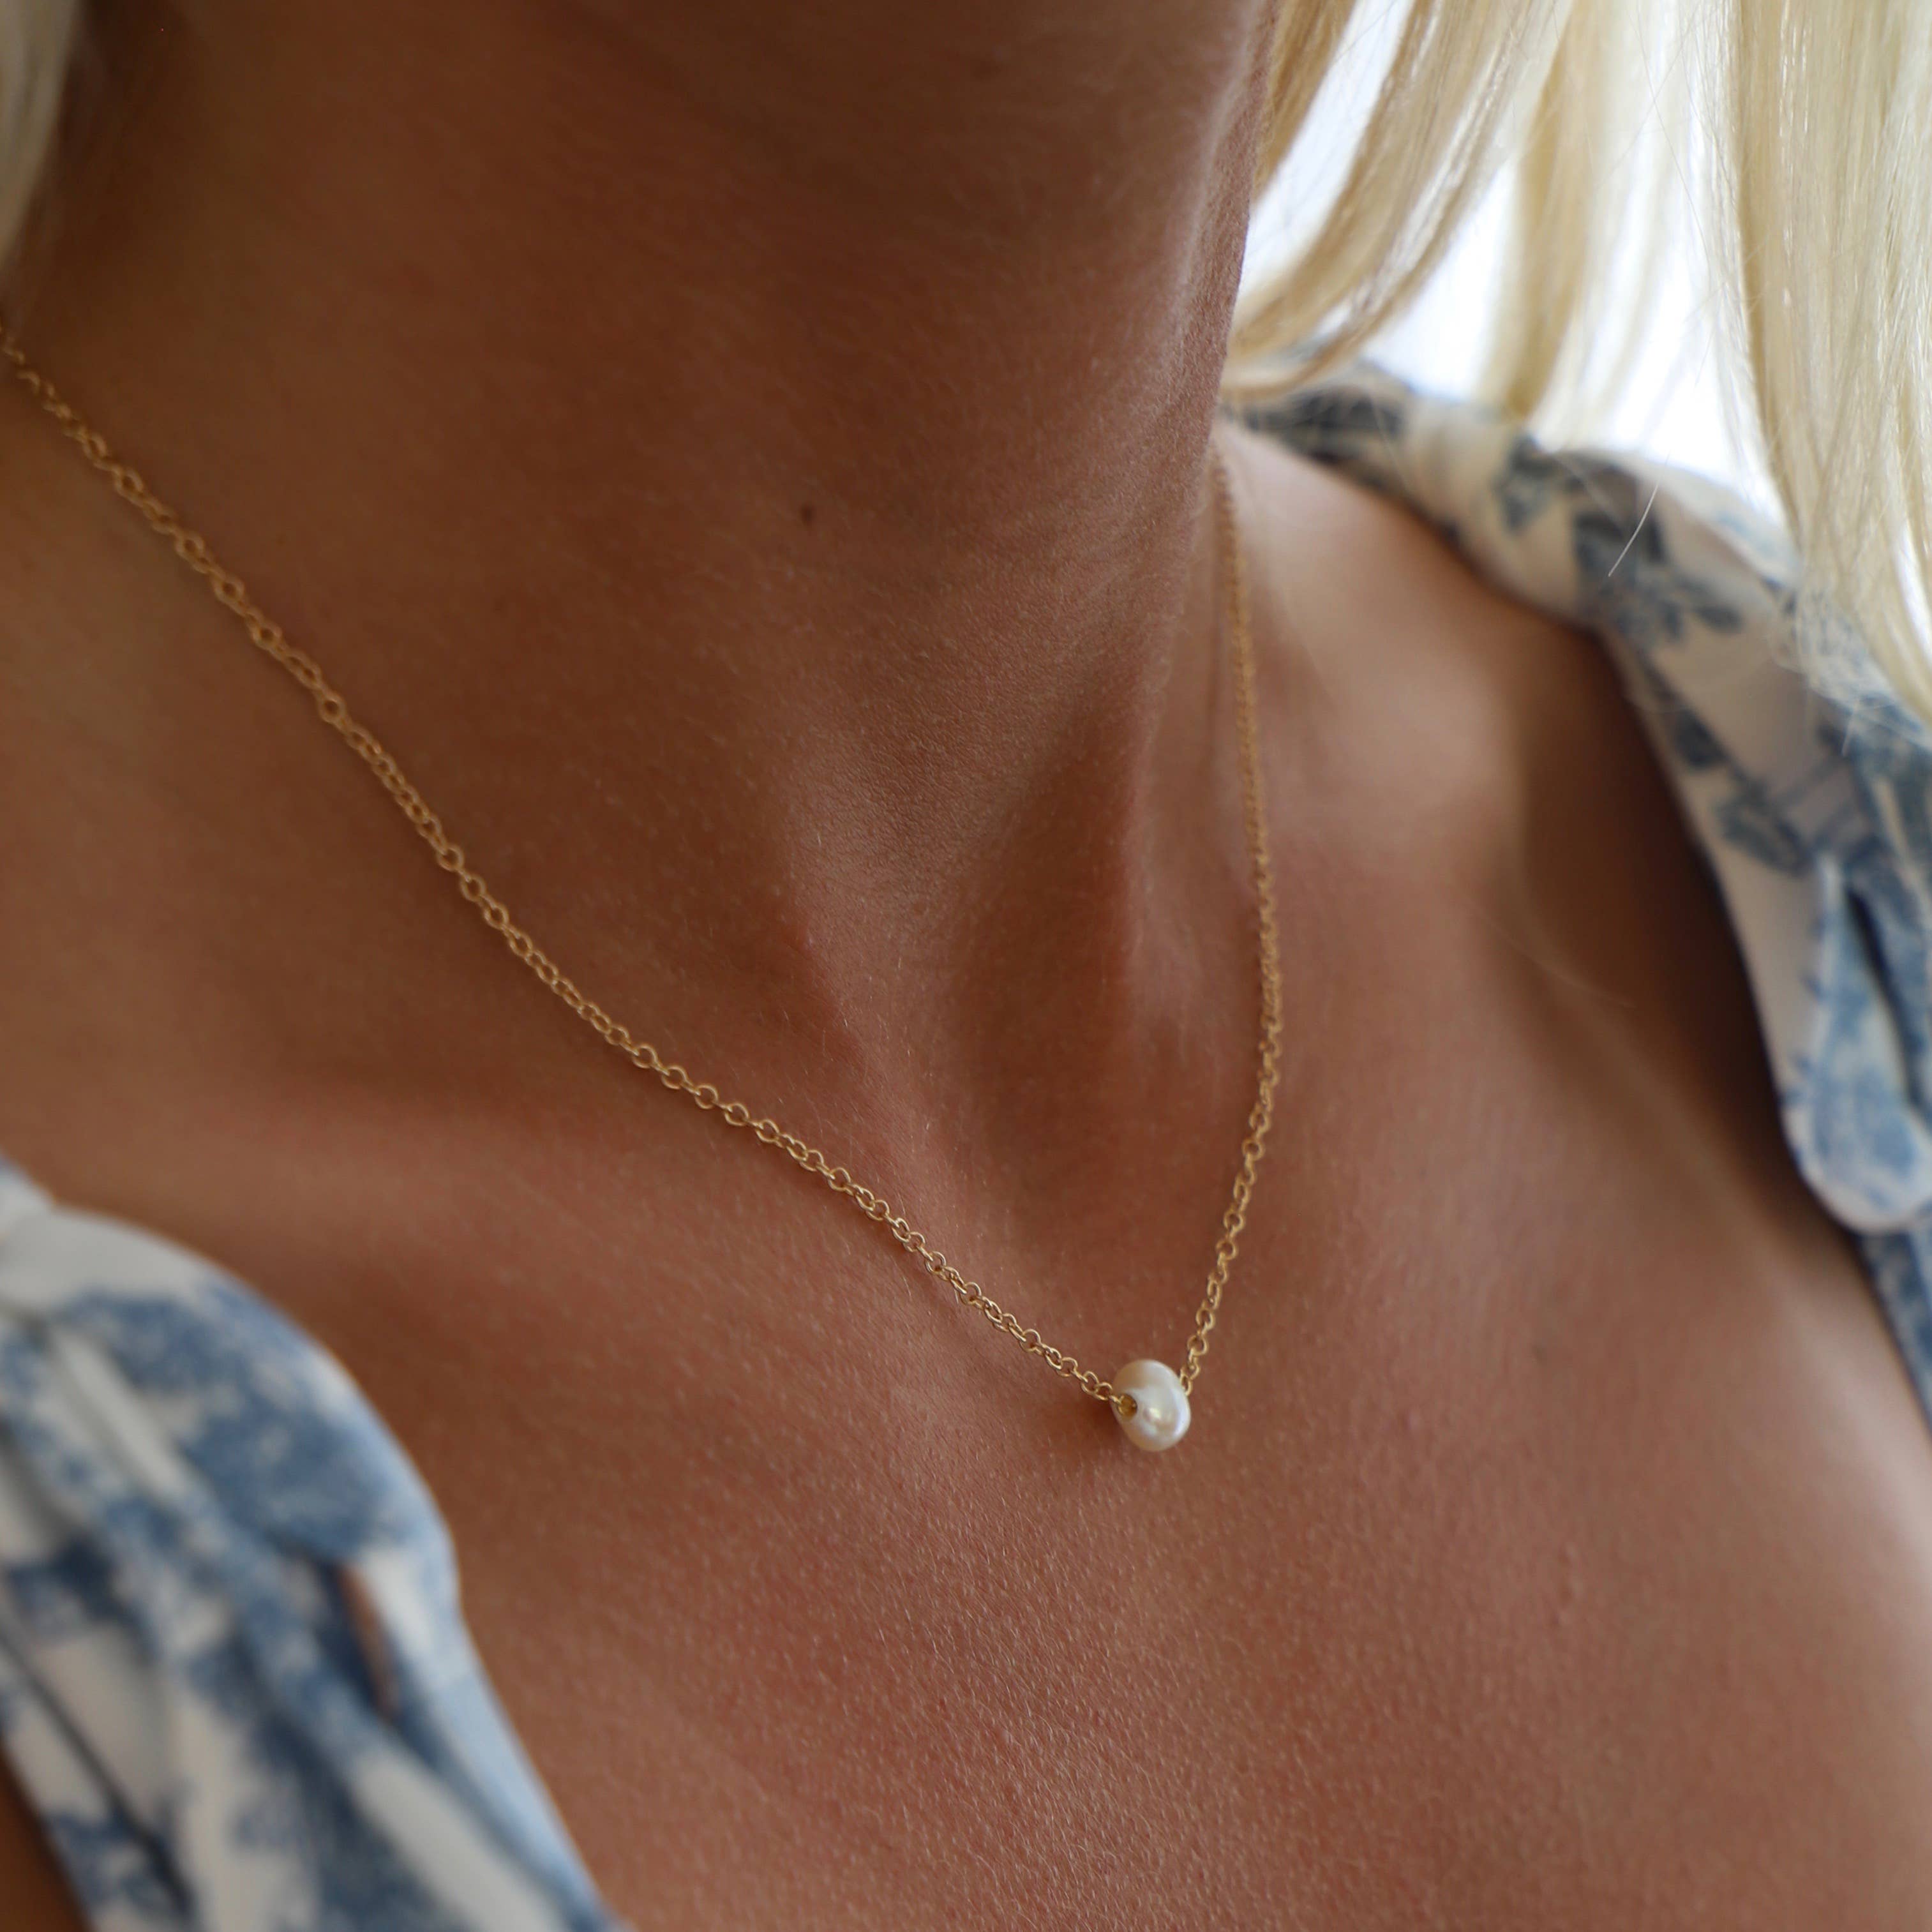 The Pearl Cove Necklace